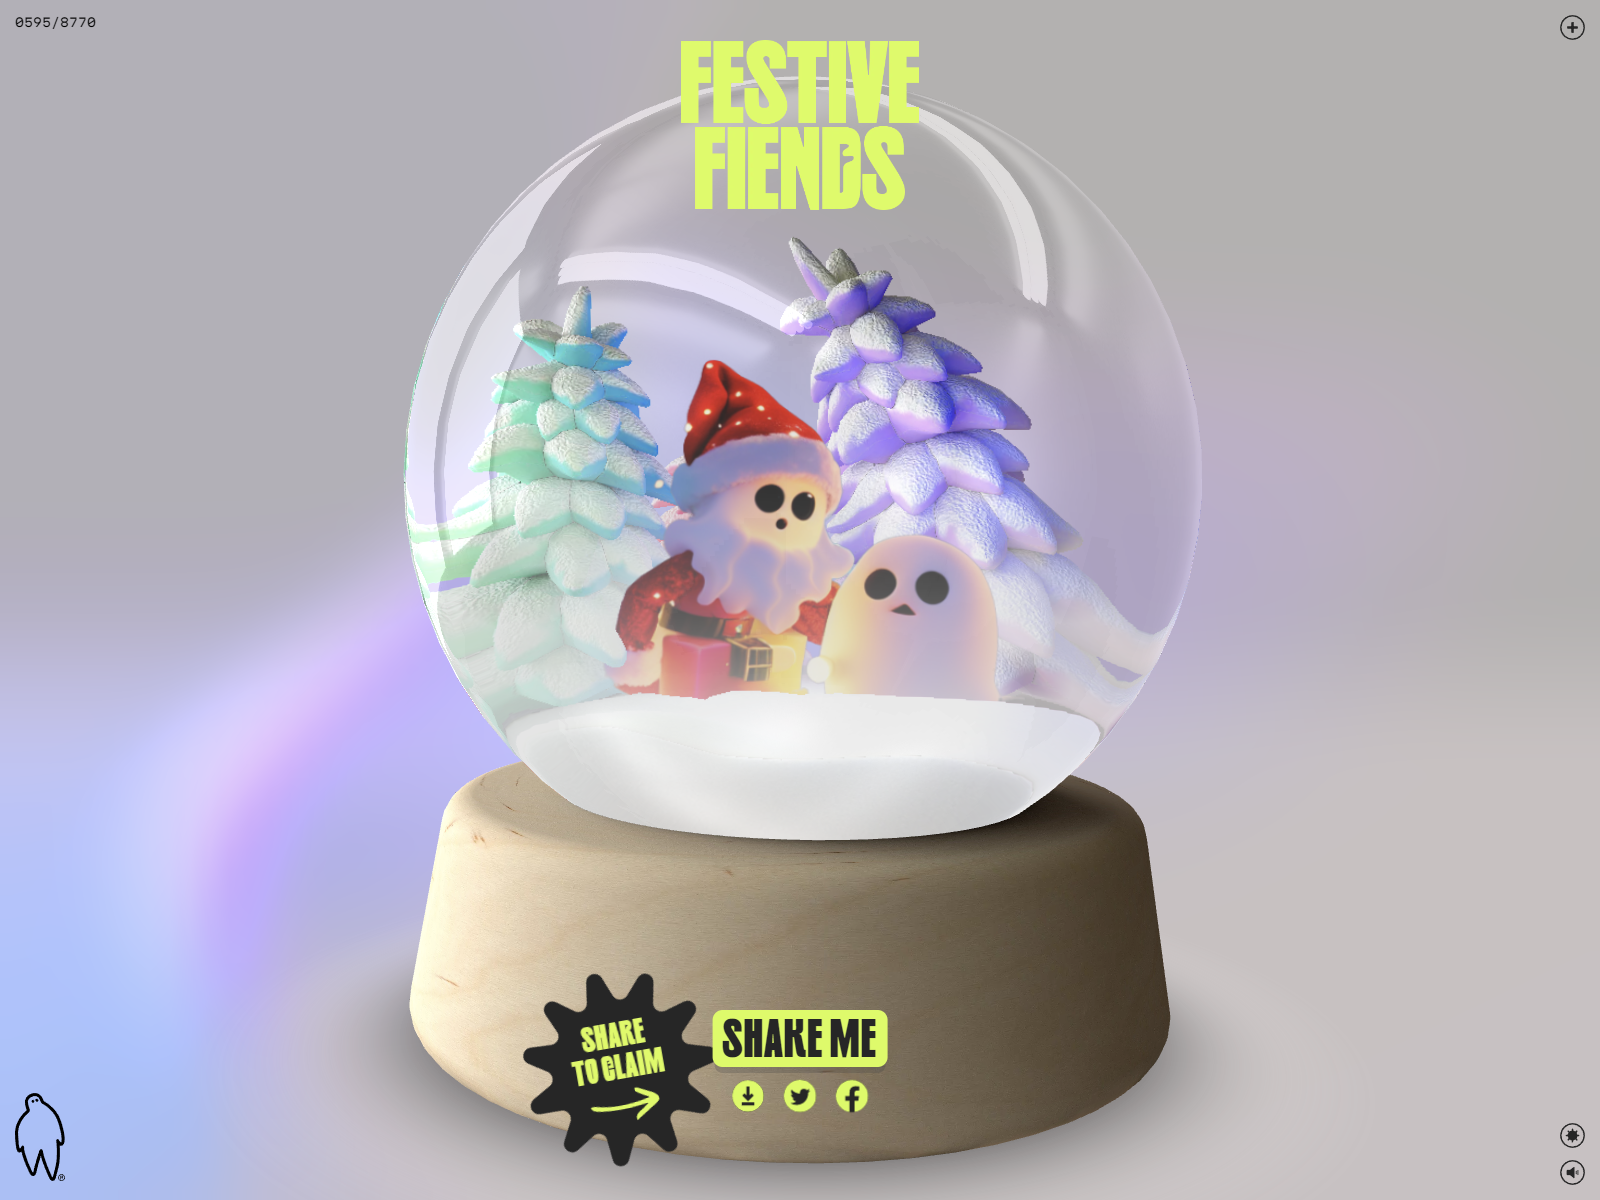 Snow Globe Movement with Aurora Effect in Background